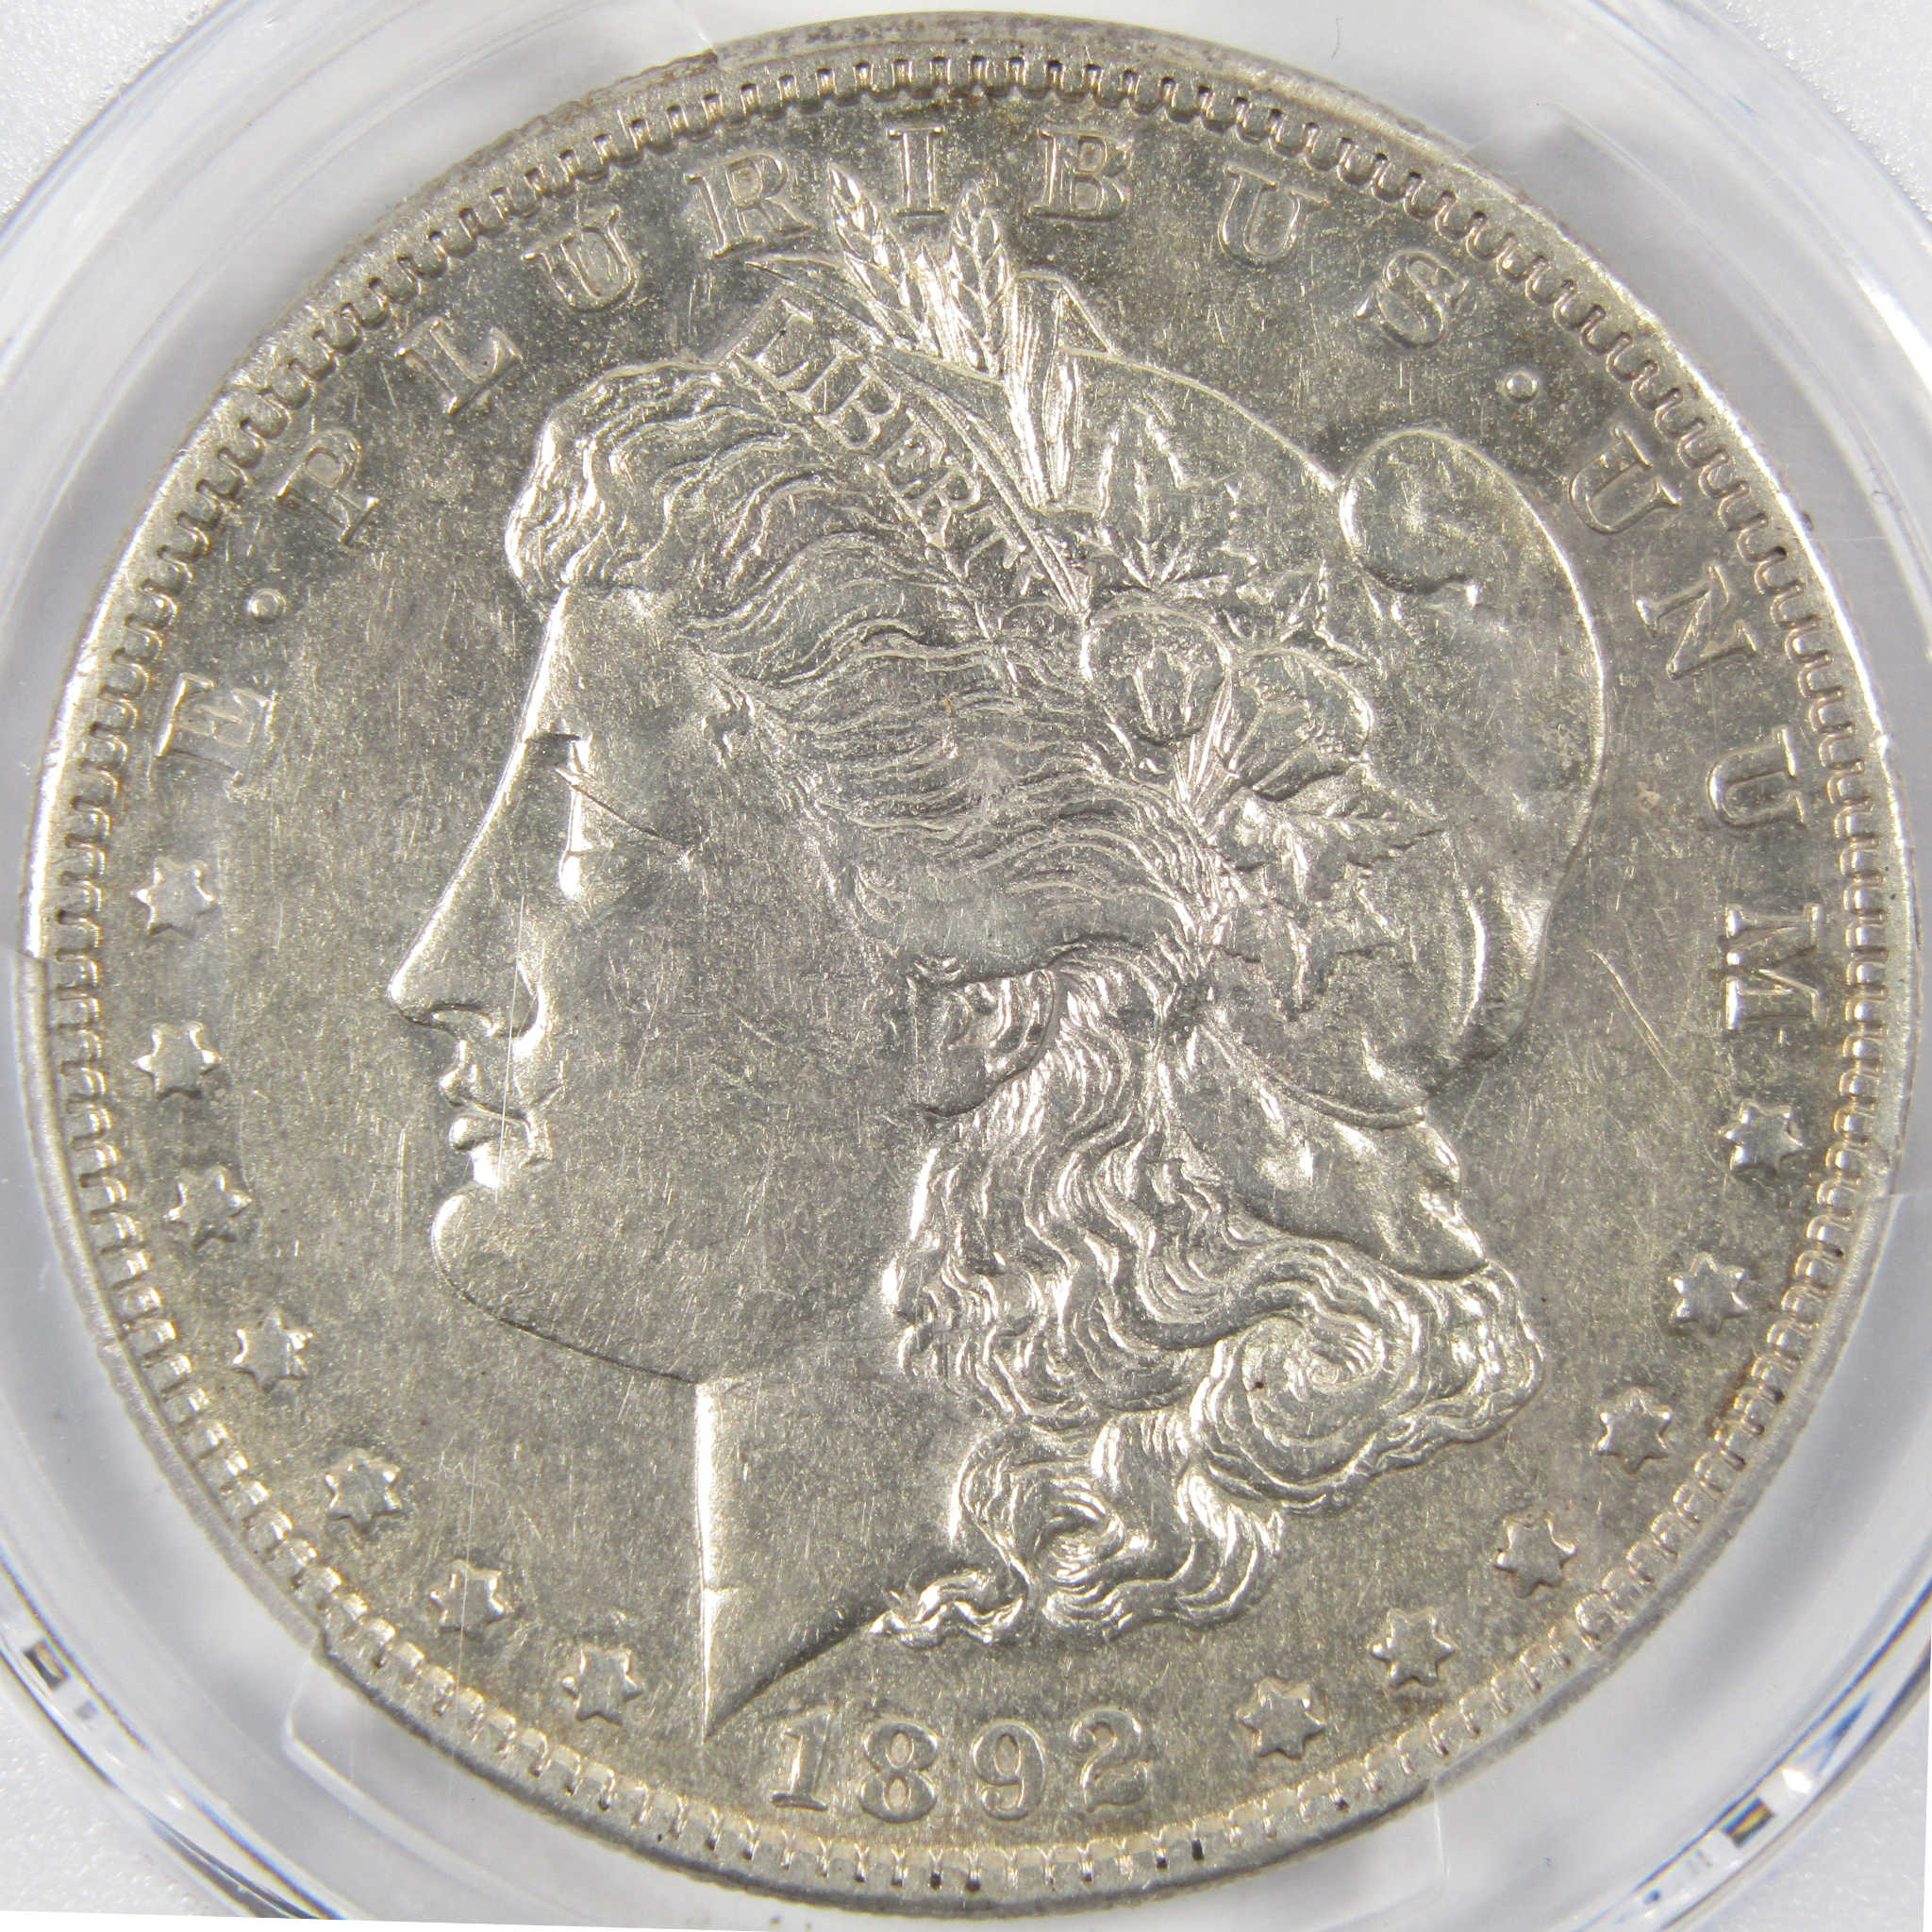 1892 S Morgan Dollar XF Details PCGS 90% Silver $1 Coin SKU:I9740 - Morgan coin - Morgan silver dollar - Morgan silver dollar for sale - Profile Coins &amp; Collectibles